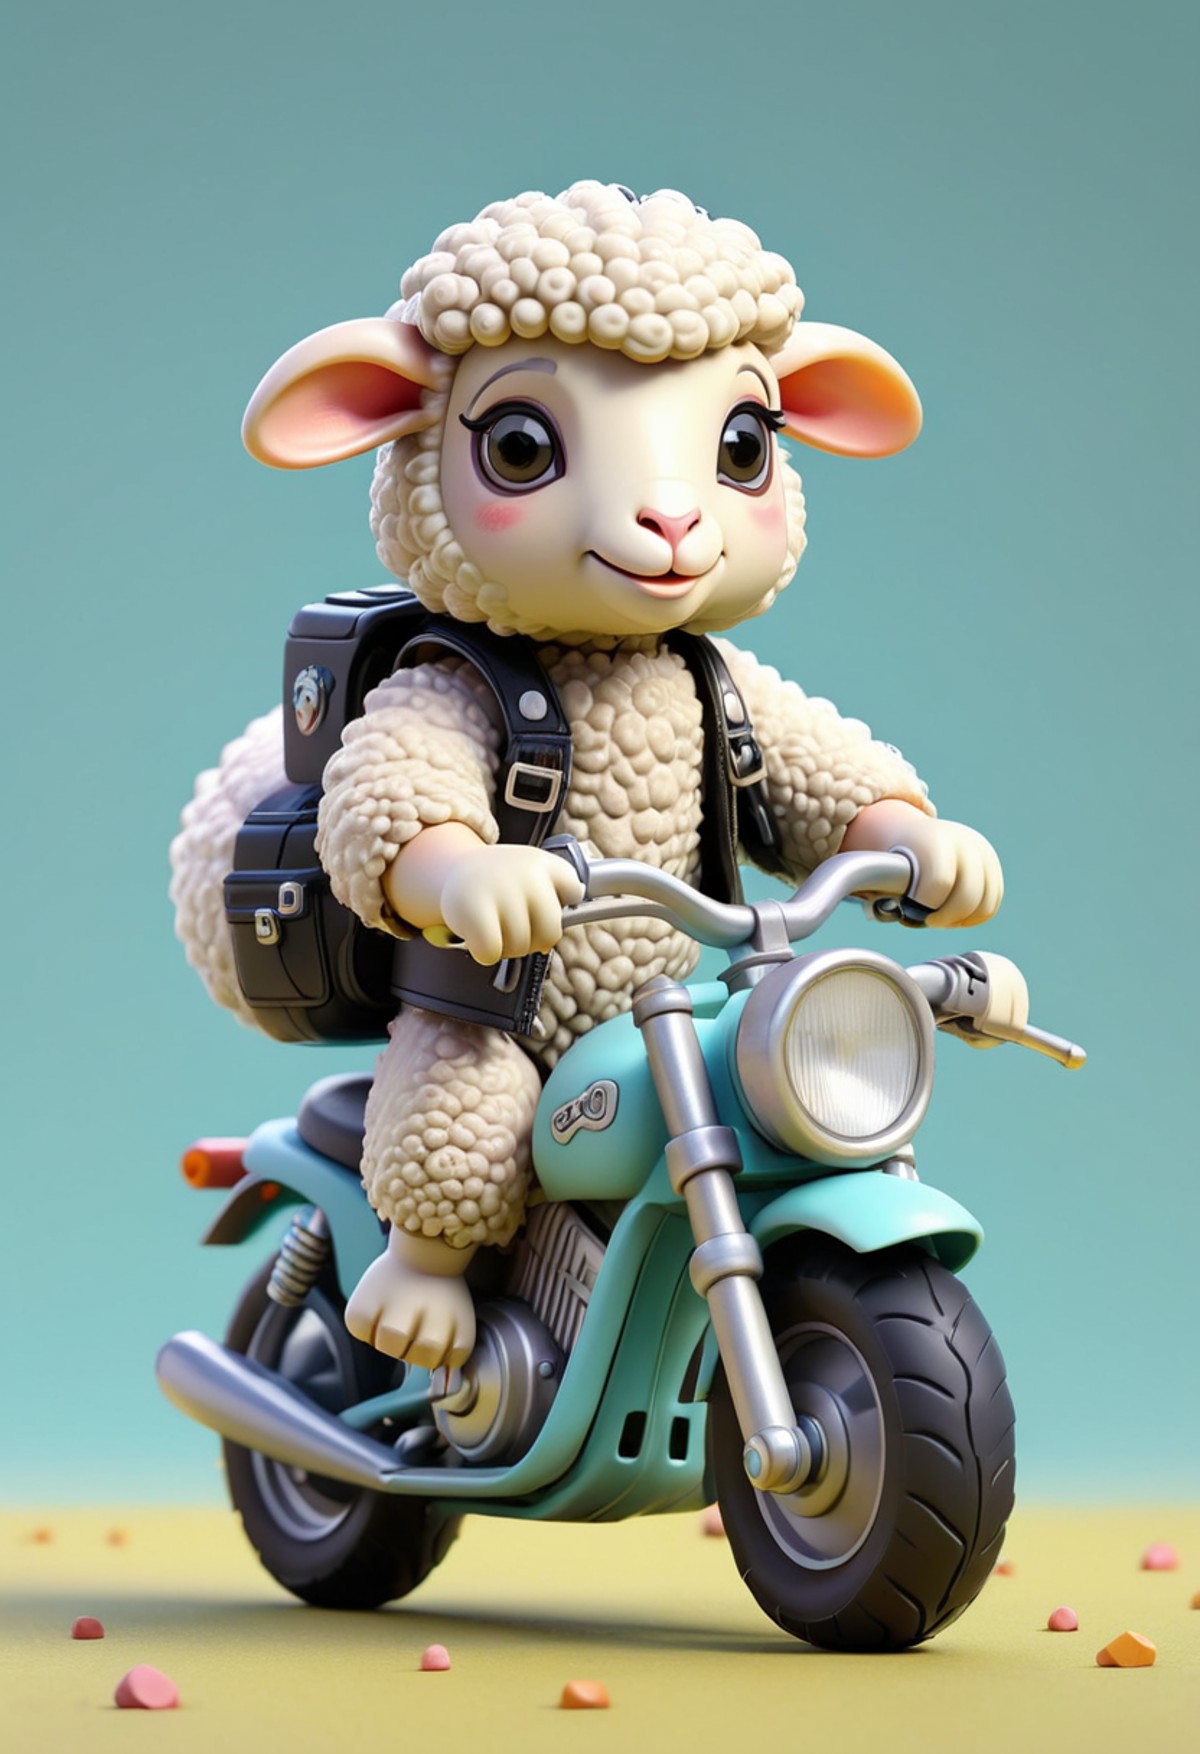 miniture, tiny cute sheep toy, riding motorbike, plastic texture, soft smooth lighting, soft pastel colors, skottie young,...